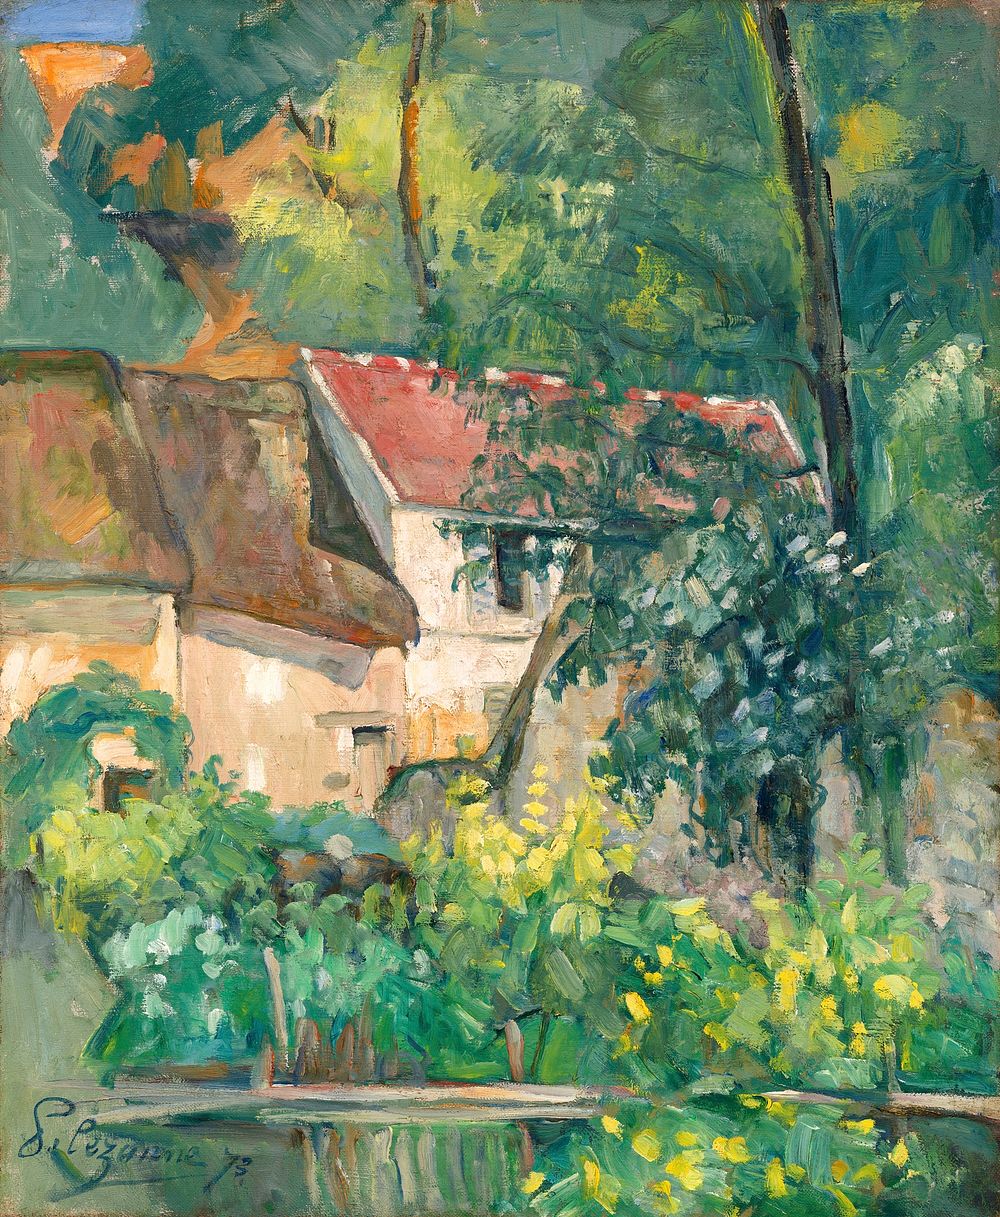 House of P&egrave;re Lacroix (1873) by Paul C&eacute;zanne. Original from The National Gallery of Art. Digitally enhanced by…